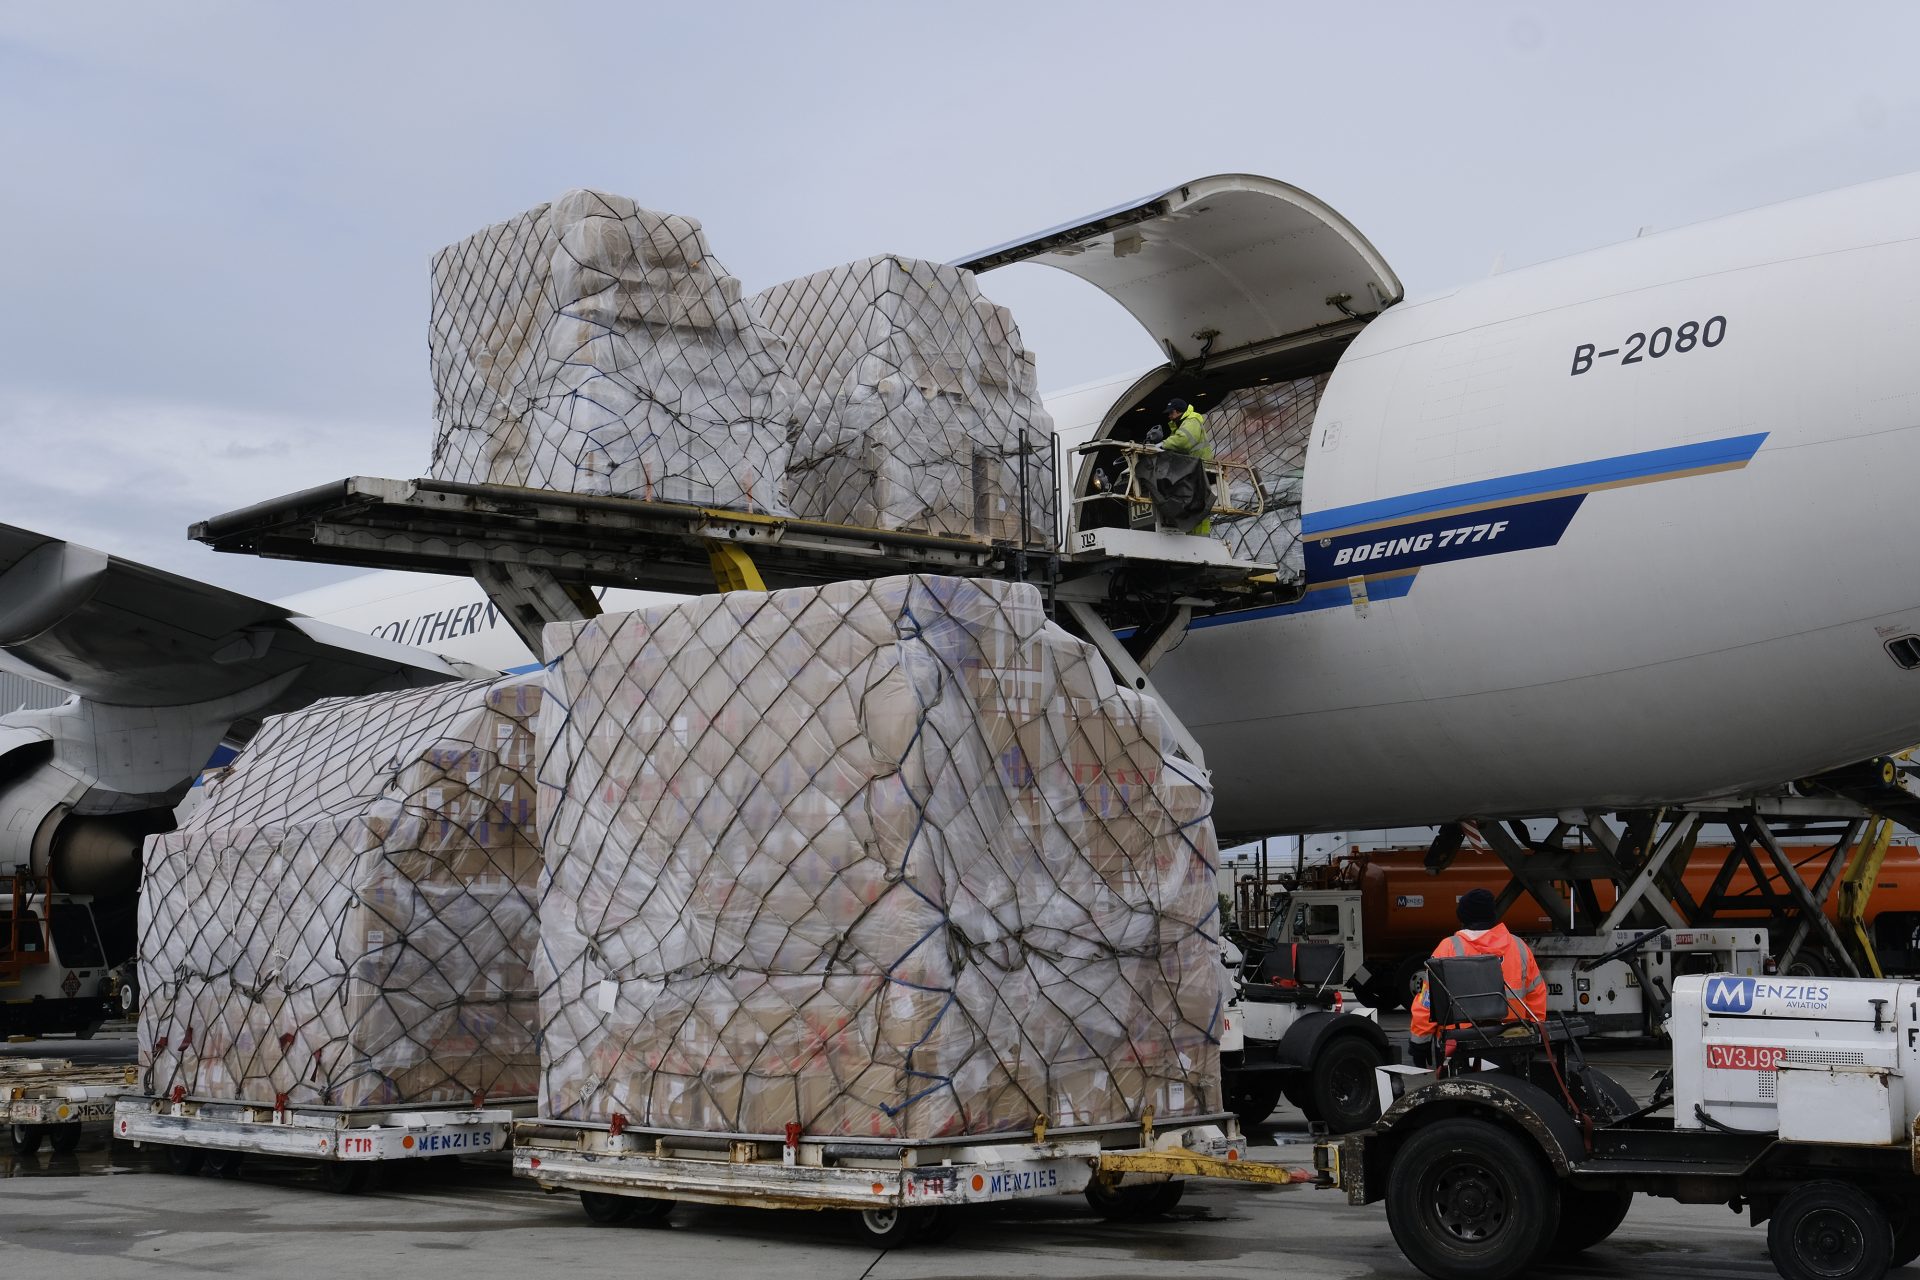 FILE - In this April 10, 2020, file photo, ground crew at the Los Angeles International airport unload pallets of supplies of medical personal protective equipment from a China Southern Cargo plane upon its arrival. An Associated Press review of more than 20 states found that before the coronavirus outbreak many had at least a modest supply of N95 masks, gowns, gloves and other medical equipment. But those supplies often were well past their expiration dates, left over from the H1N1 influenza outbreak a decade ago.